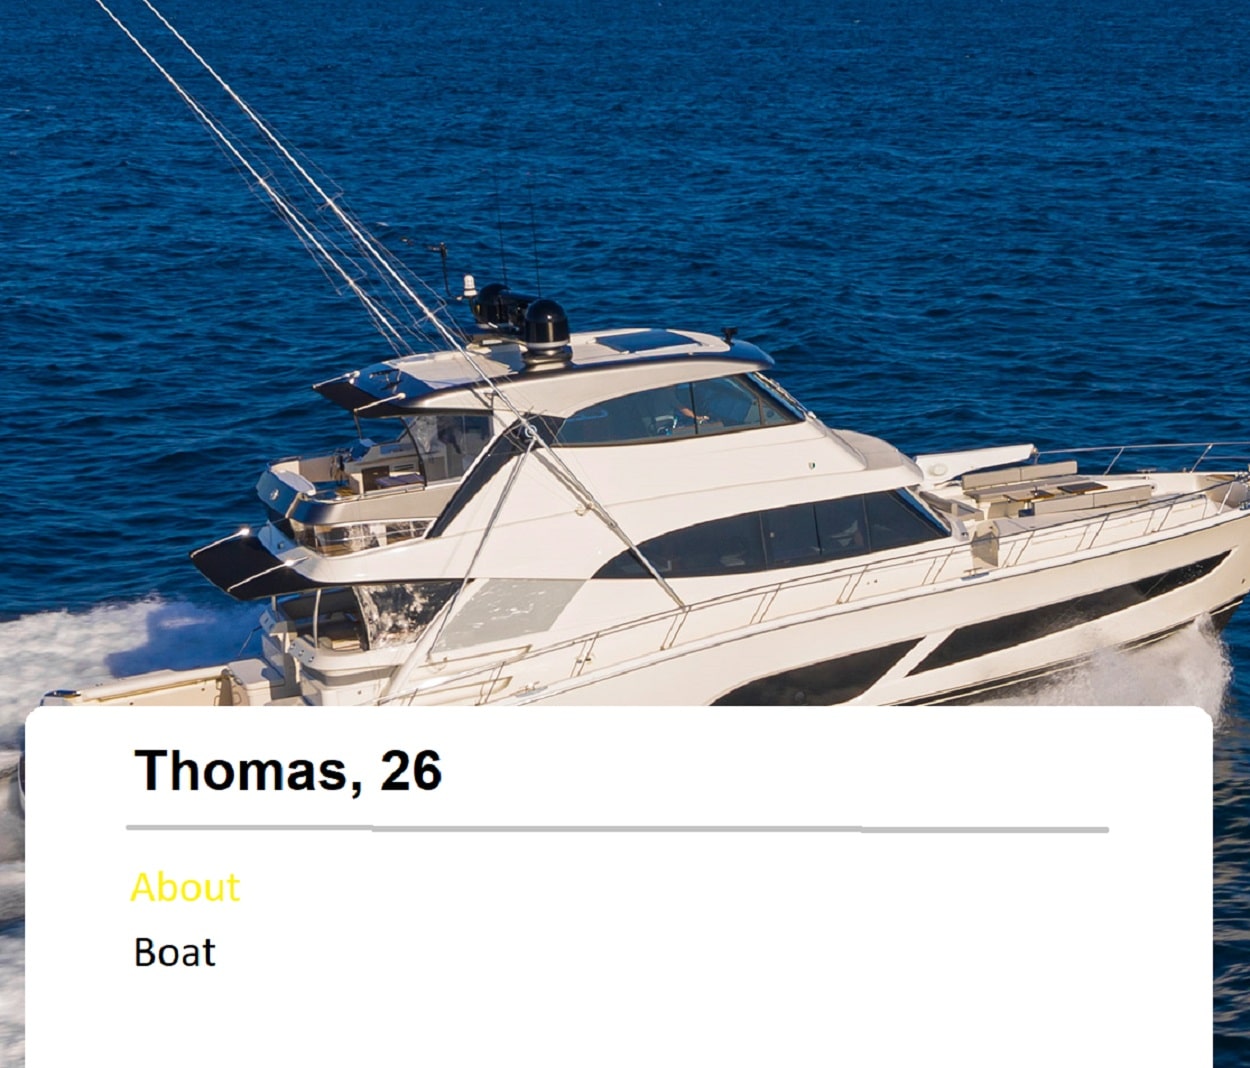 Cottesloe man replaces his dating profile pics with photos of his dad’s boat